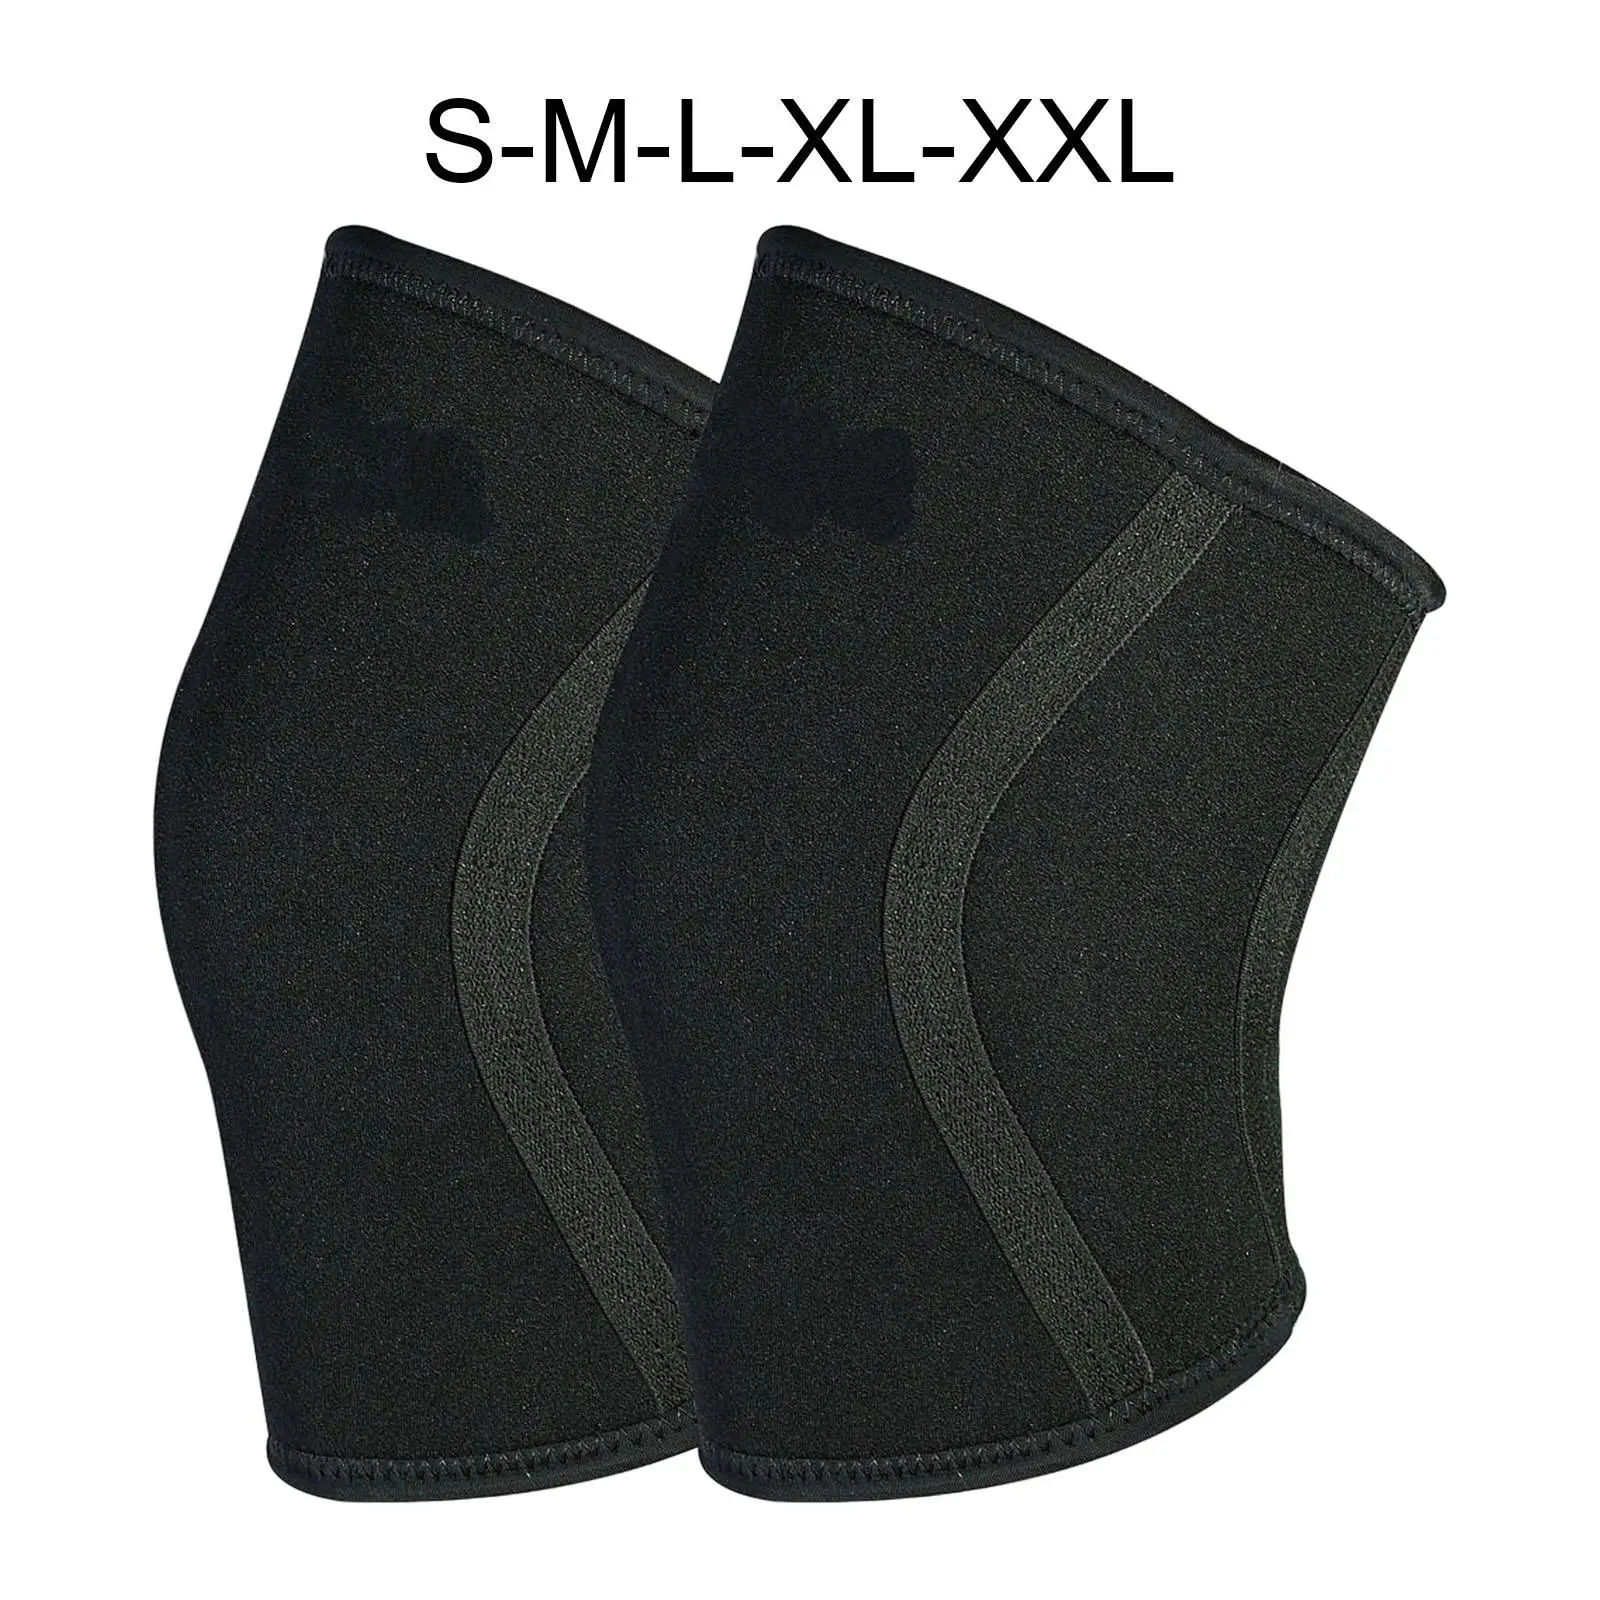 2x Knee Brace Support Patella Pad Women Men Protector Knee Sleeves for Cycling Fitness Outdoor Workout Jogging